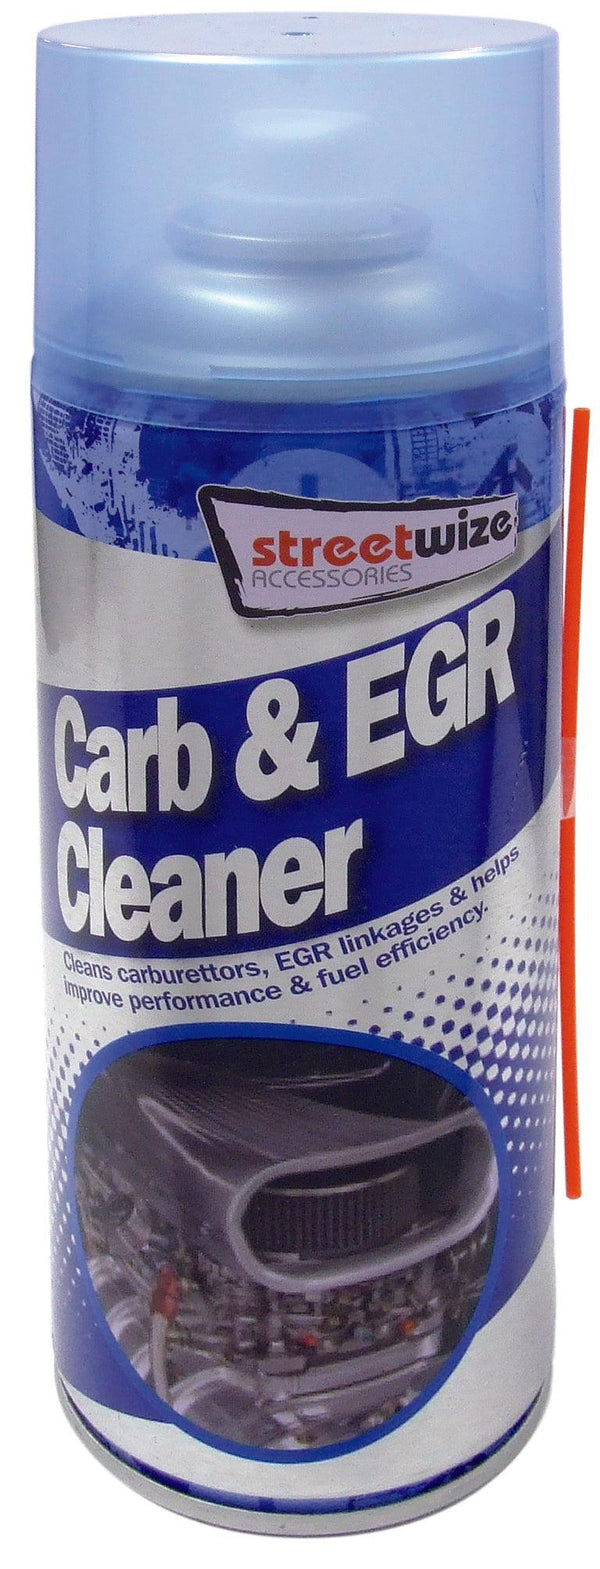 Streetwize Carb & EGR Cleaner - Towsure